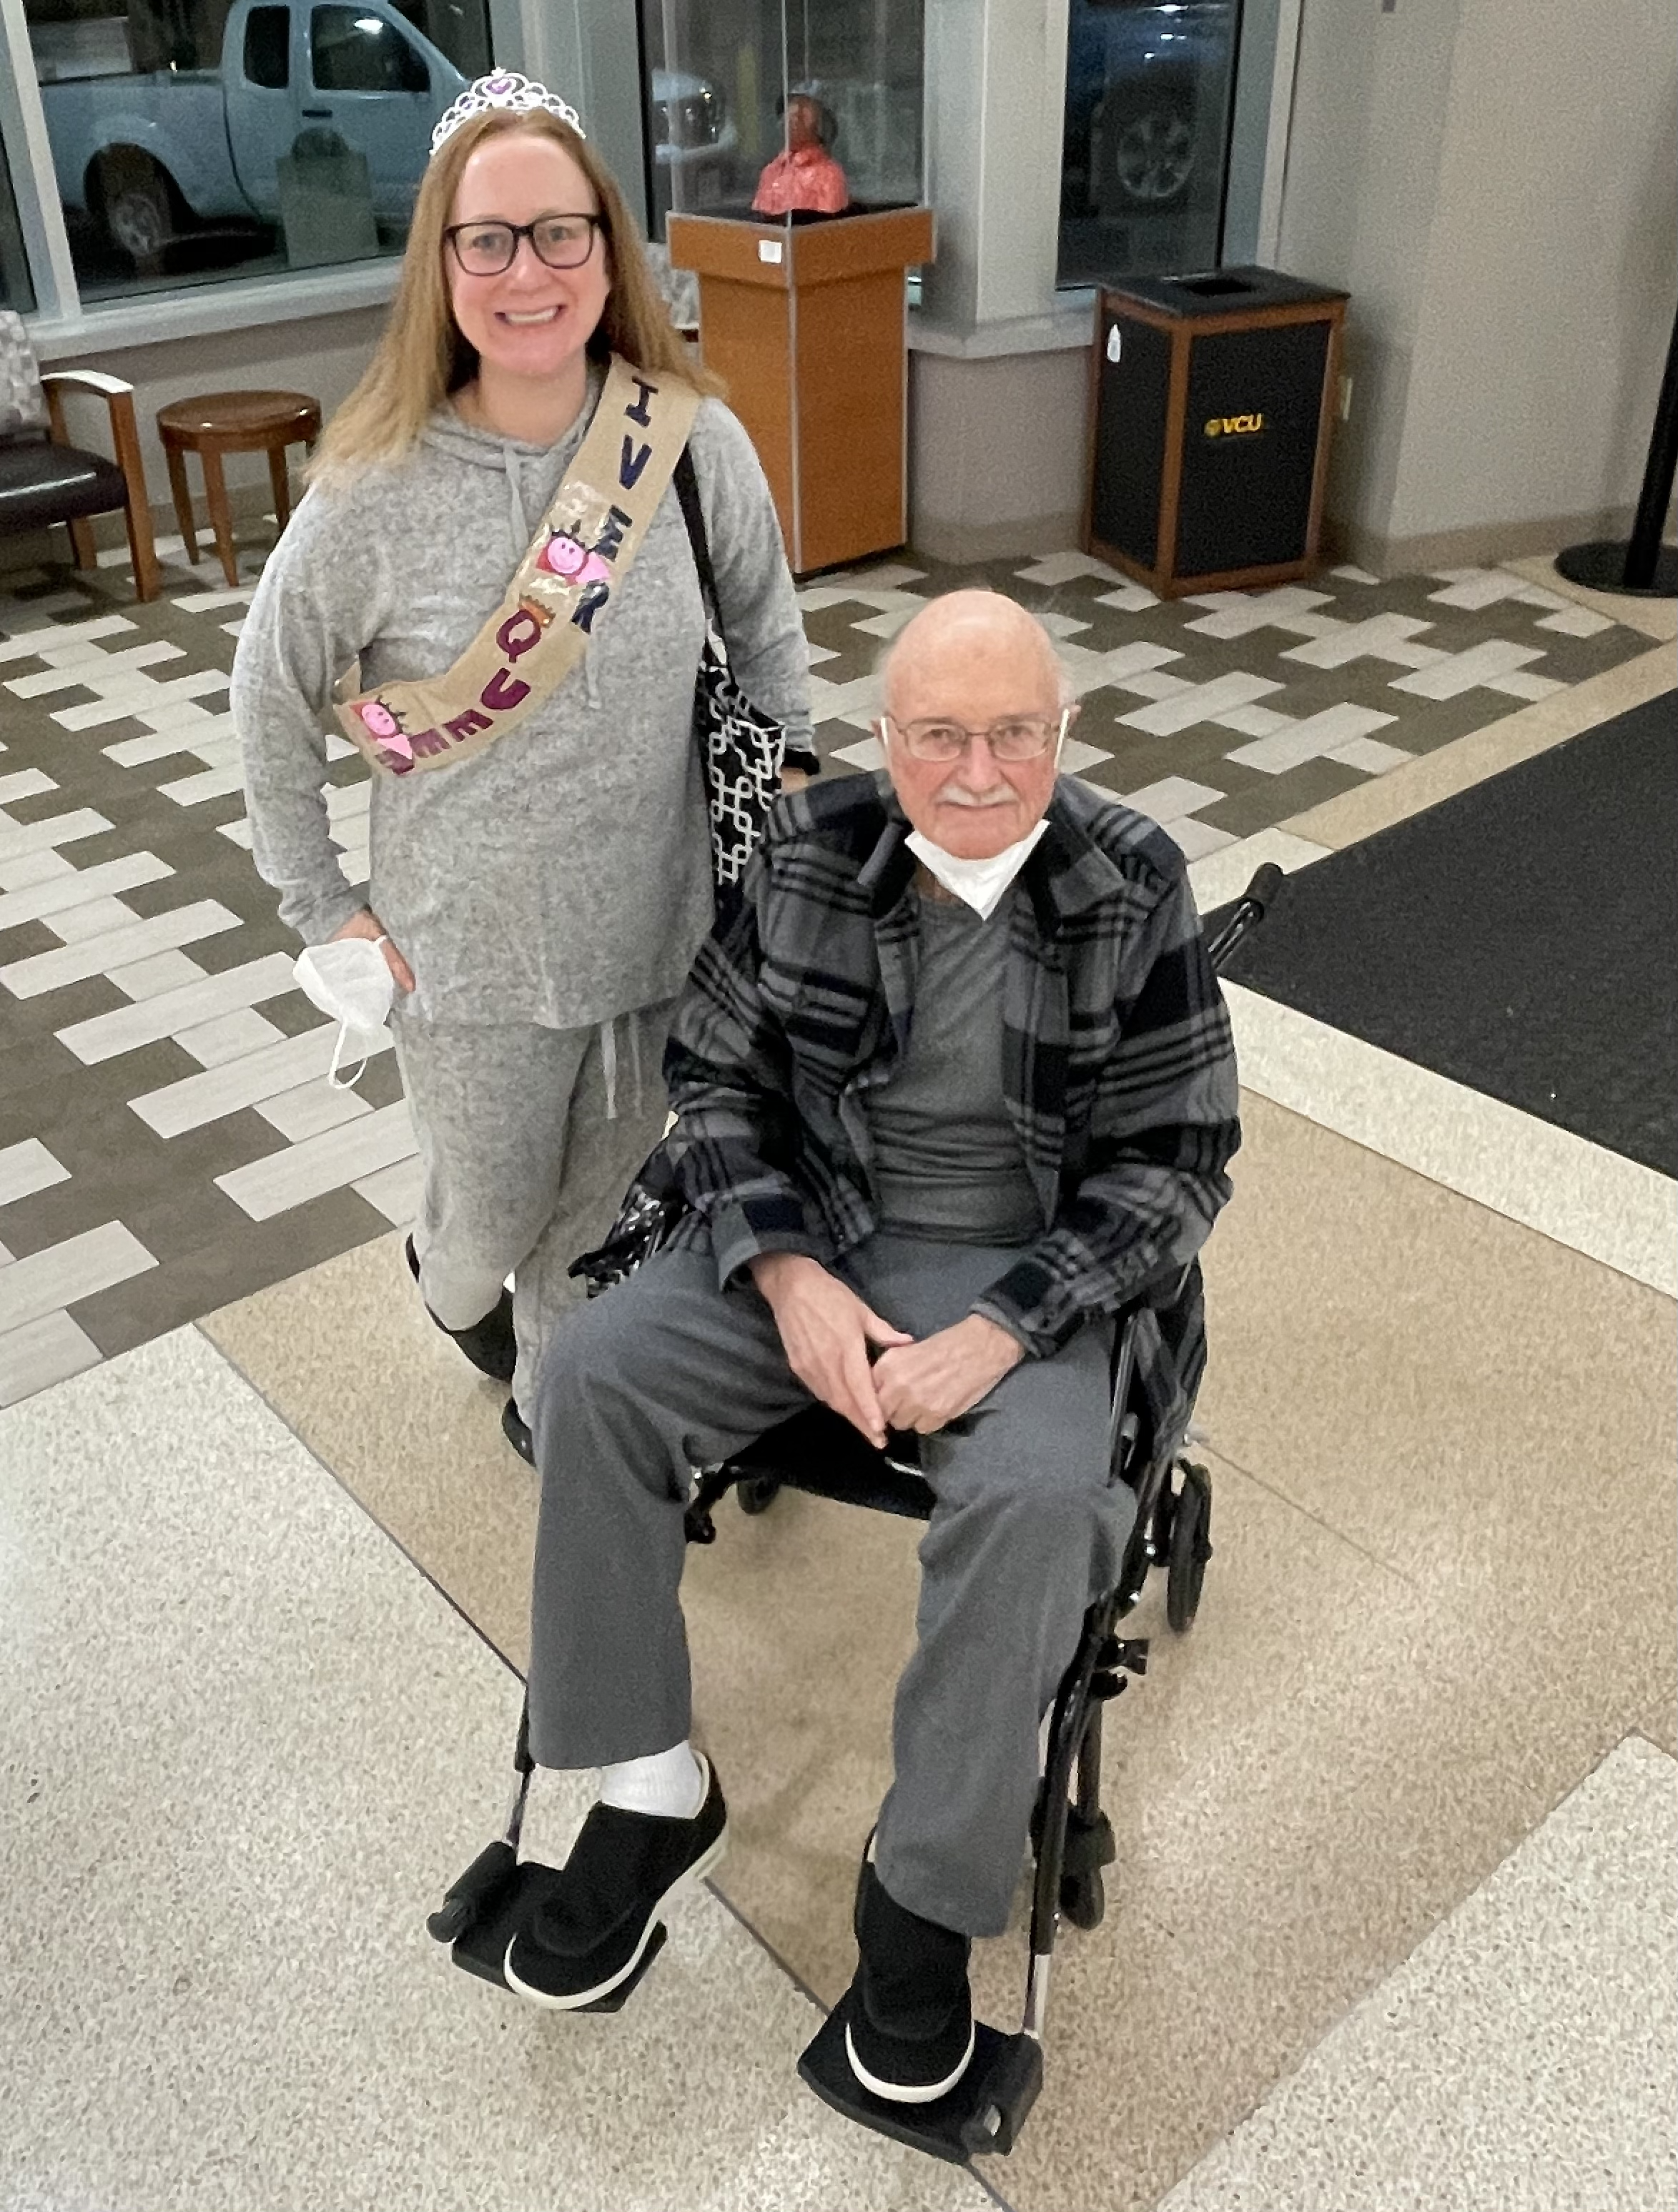 Man in wheelchair and woman with tiara smiling